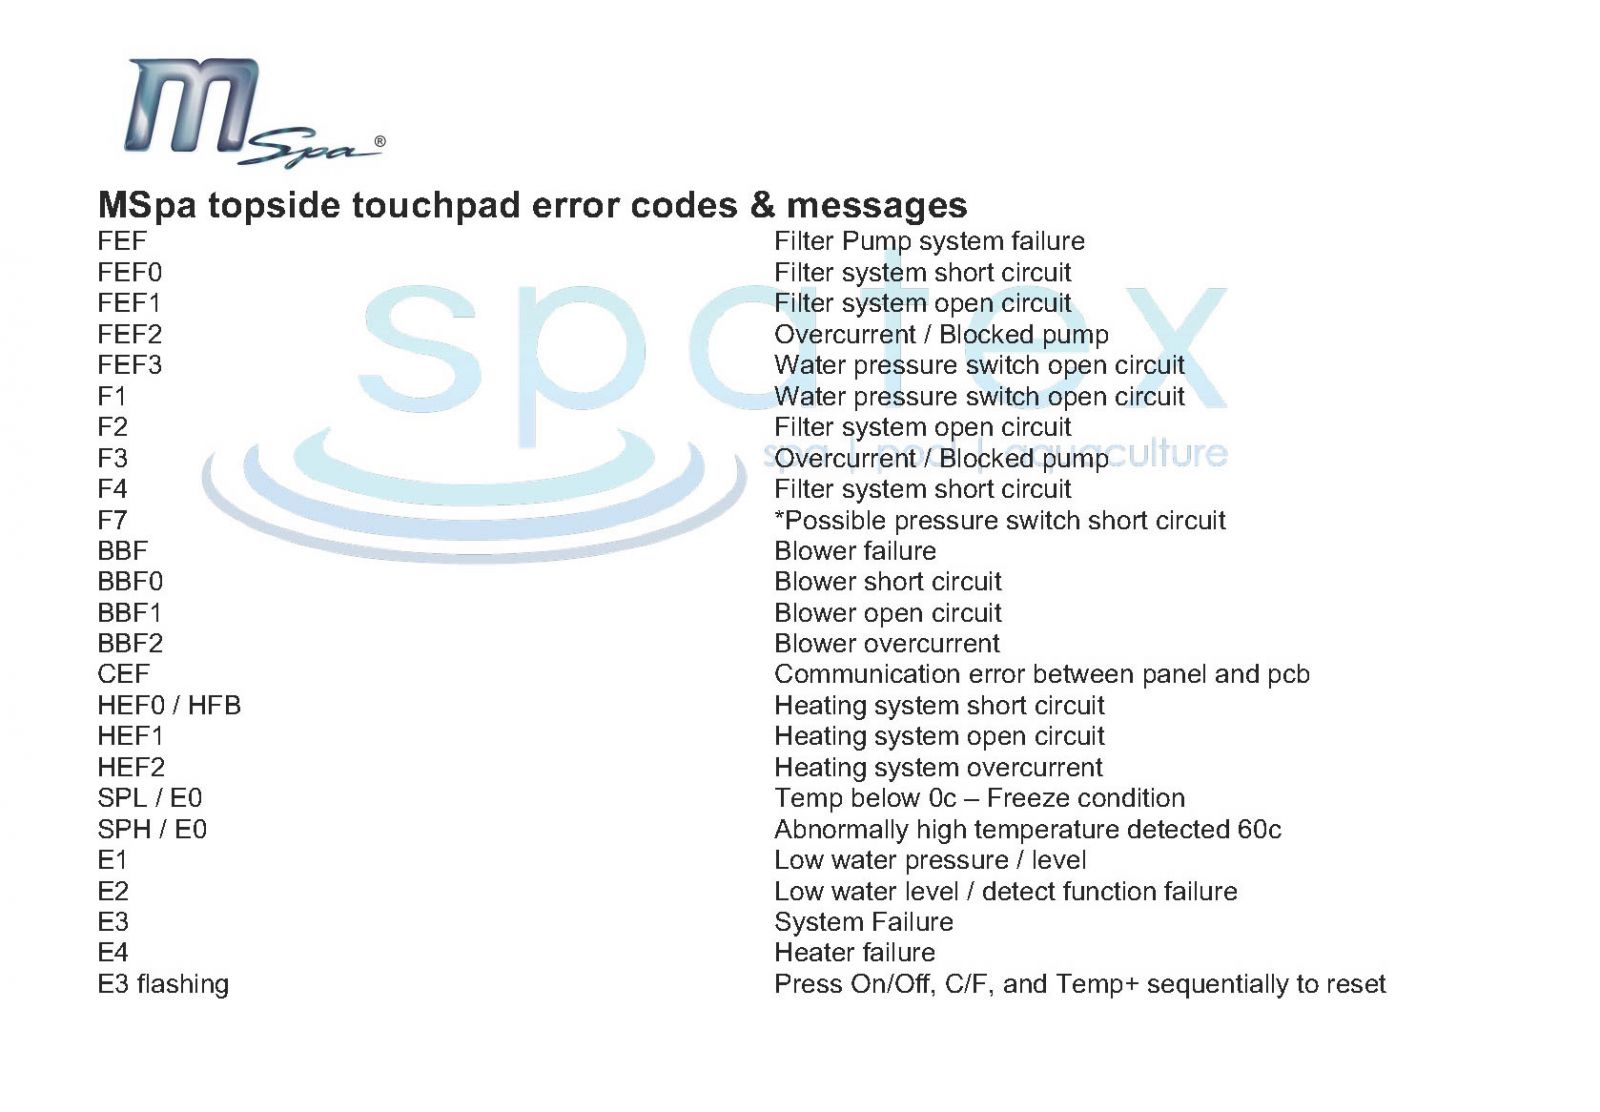 Mspa topside touchpad fault codes